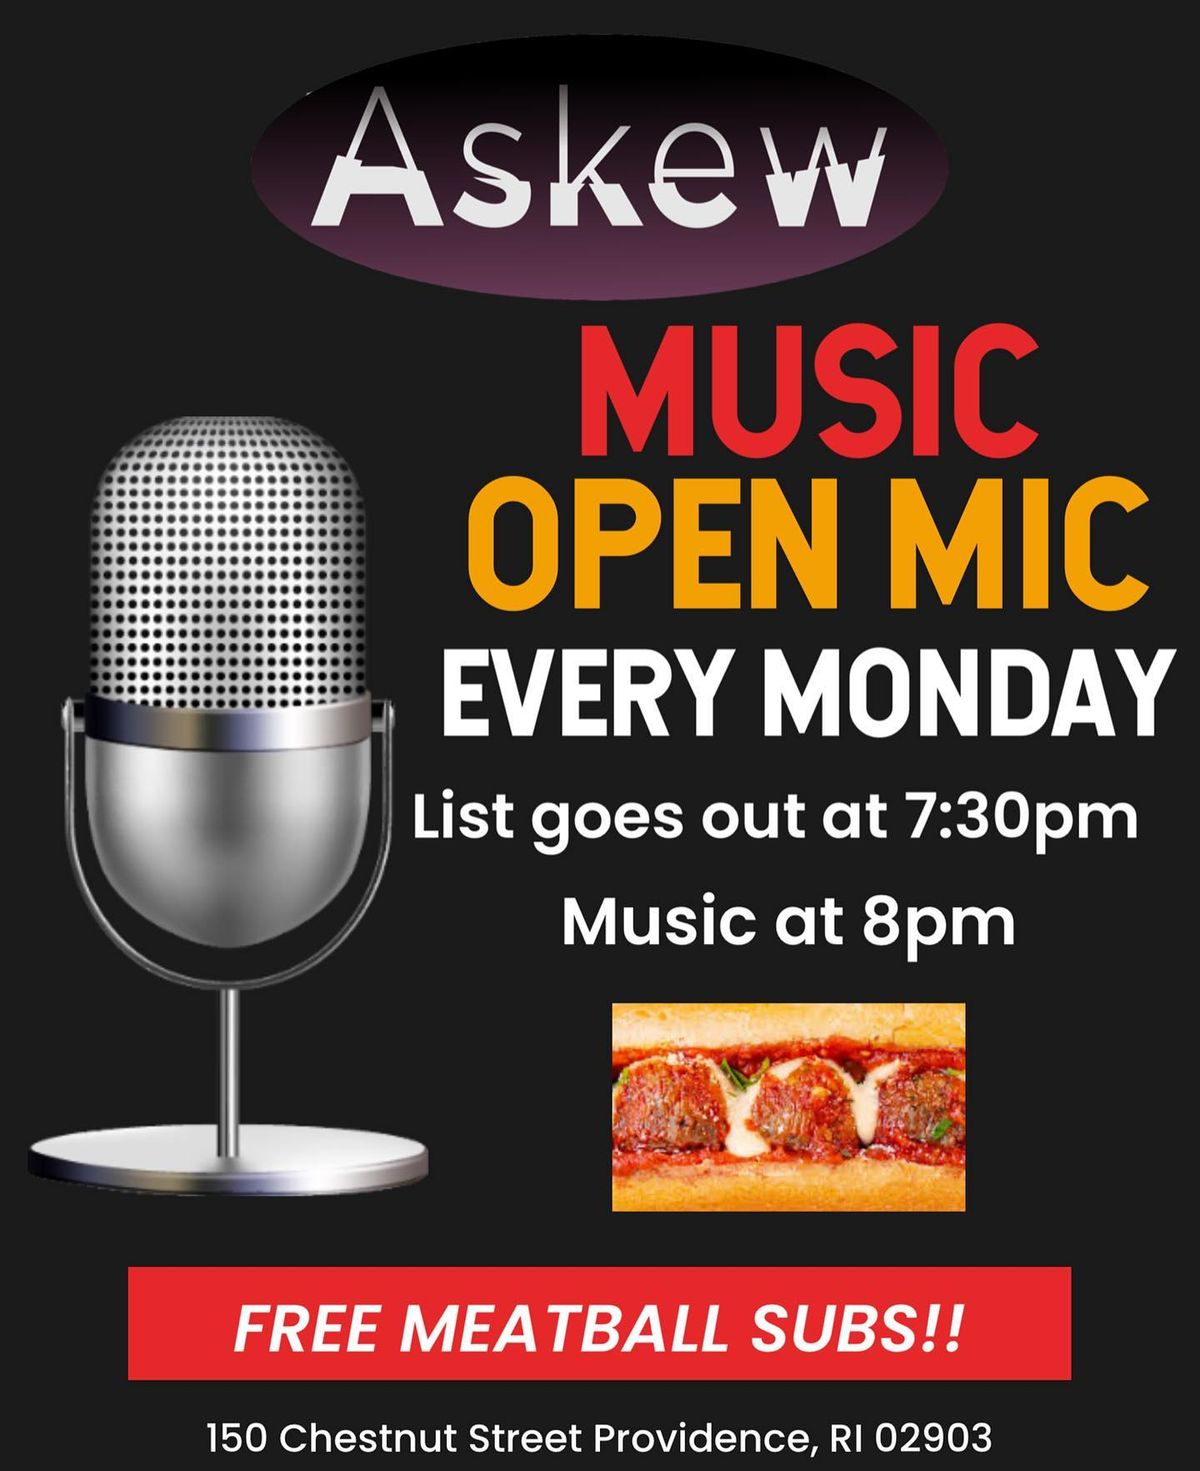 MEATBALL MONDAYS AND OPEN MIC AT ASKEW!!